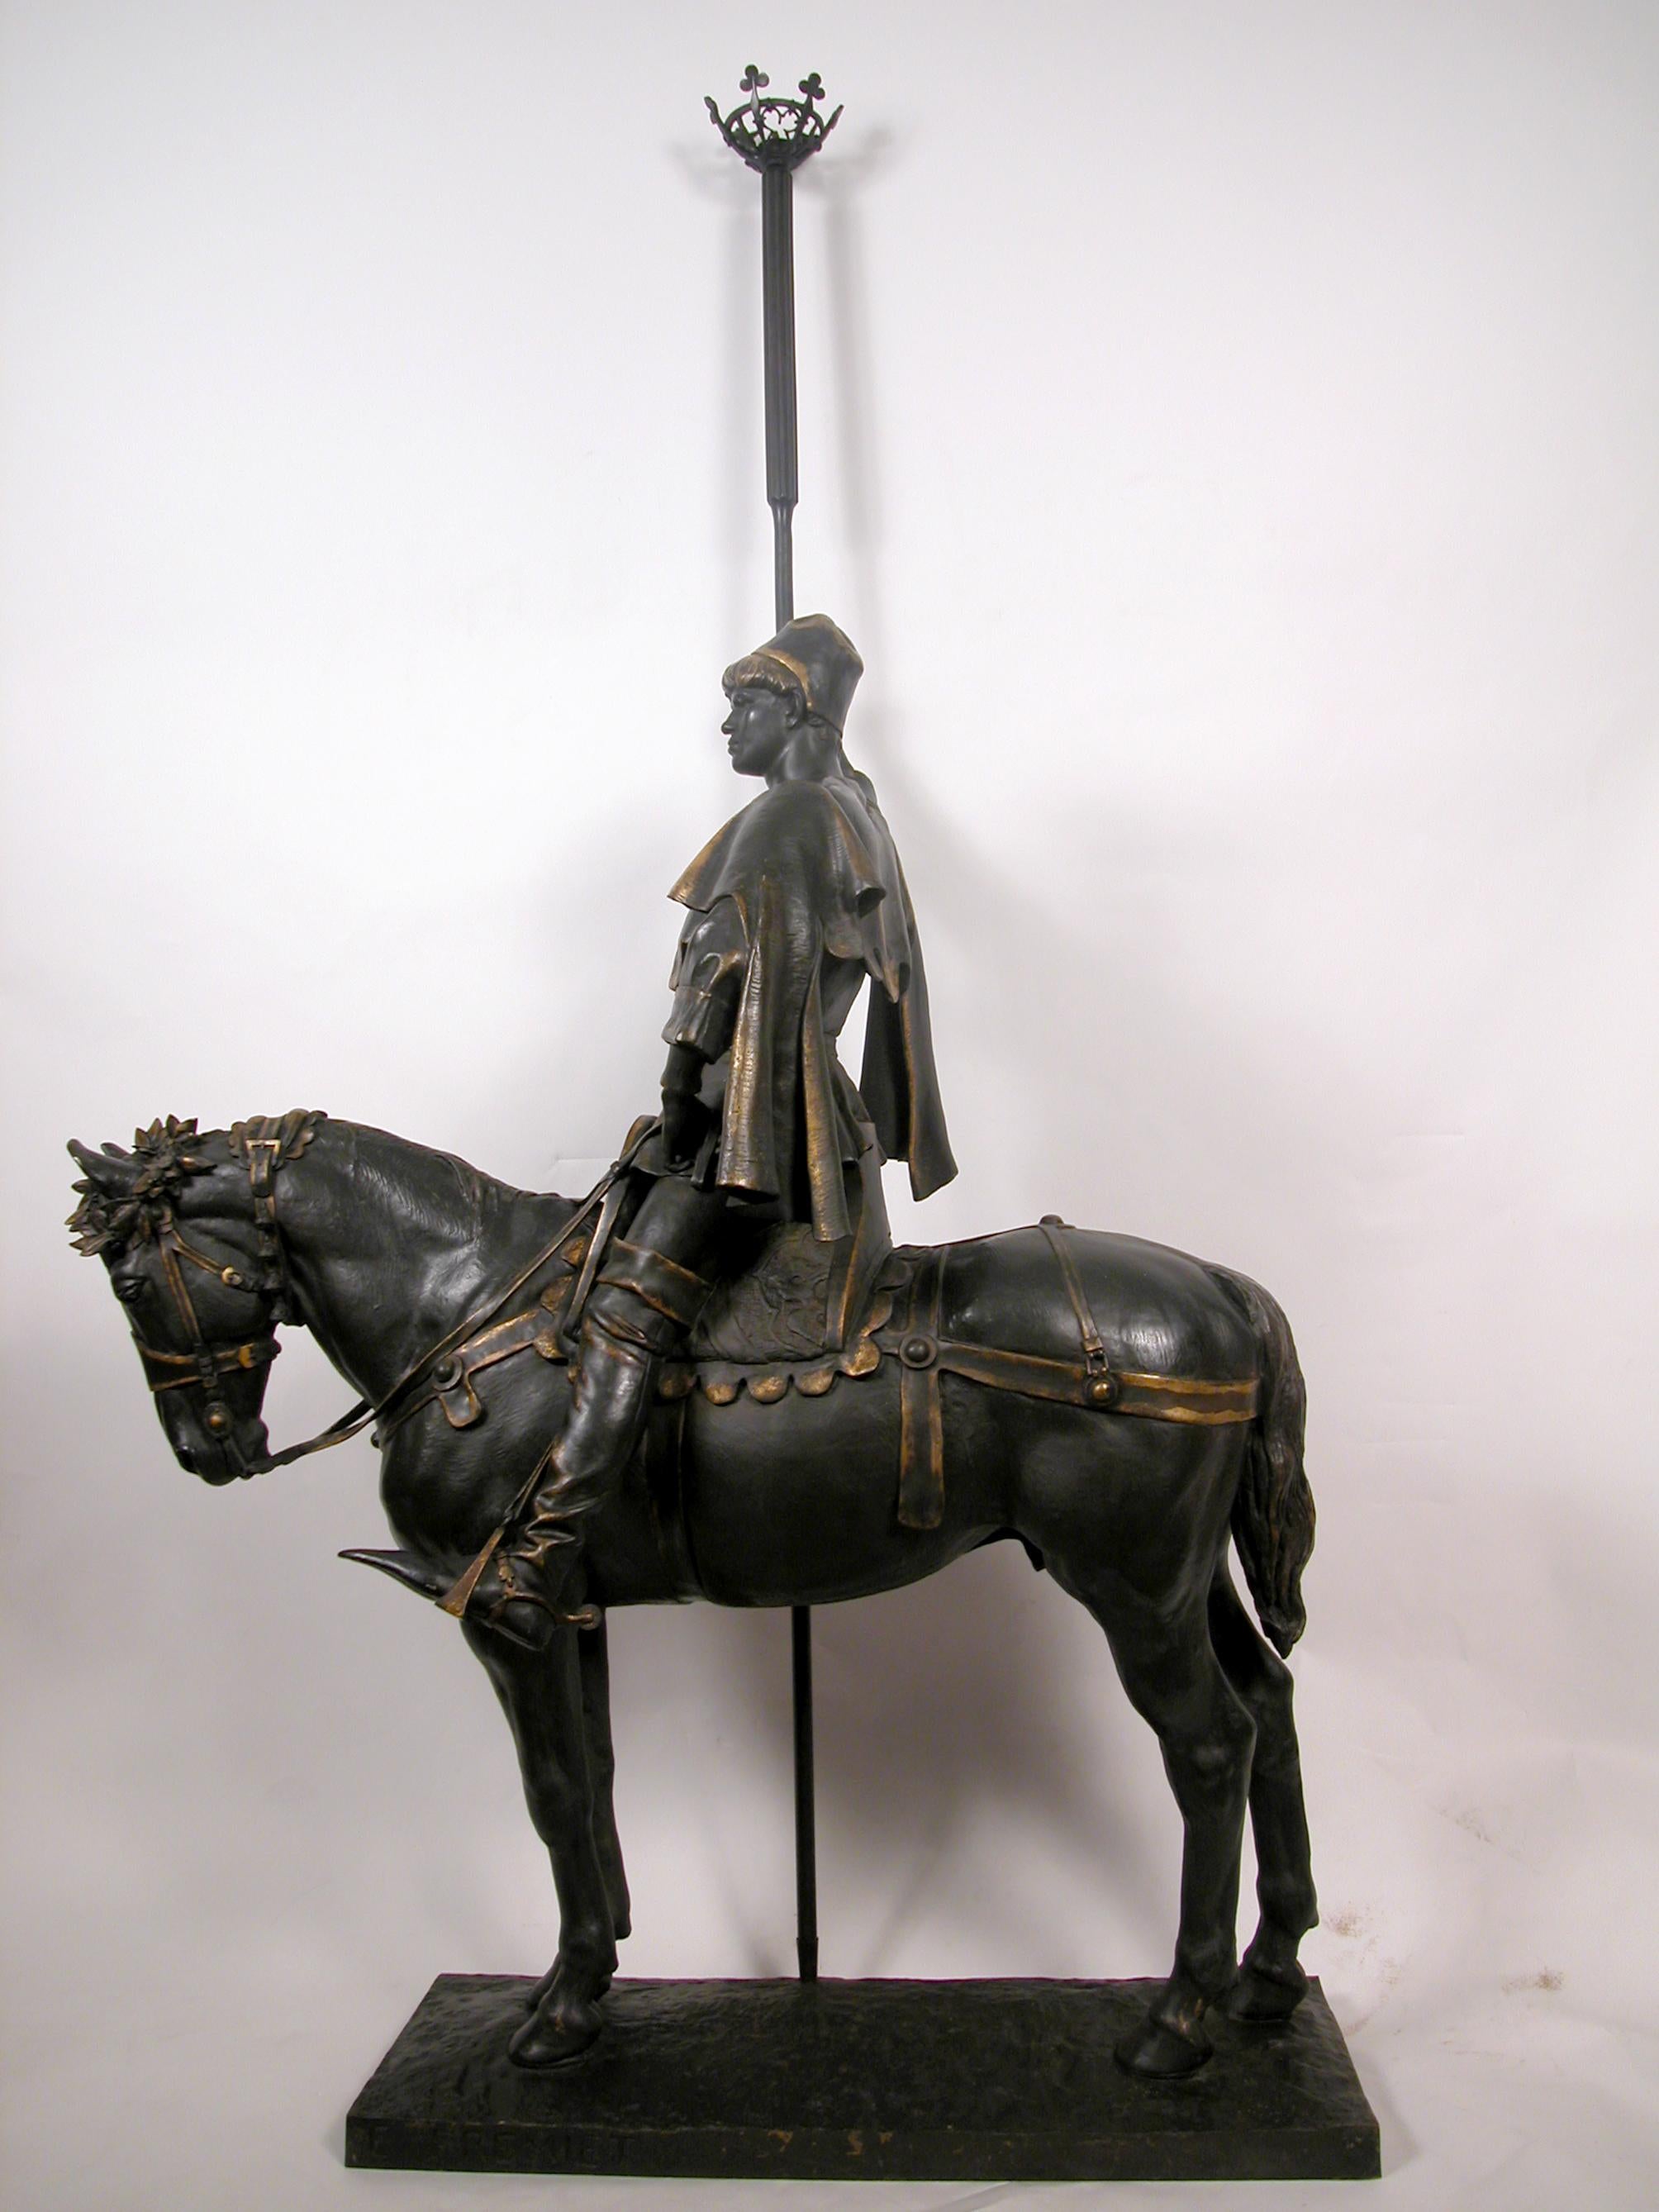 Signed E. Frémiet and F. Barbedienne, Fondeur.

This two patina bronze is listed as the Porte-falot (Torch-holder) model No. 1. It is two thirds lower cast of the equestrian group ordered in 1882 by the Prefecture of the Seine to serve as a